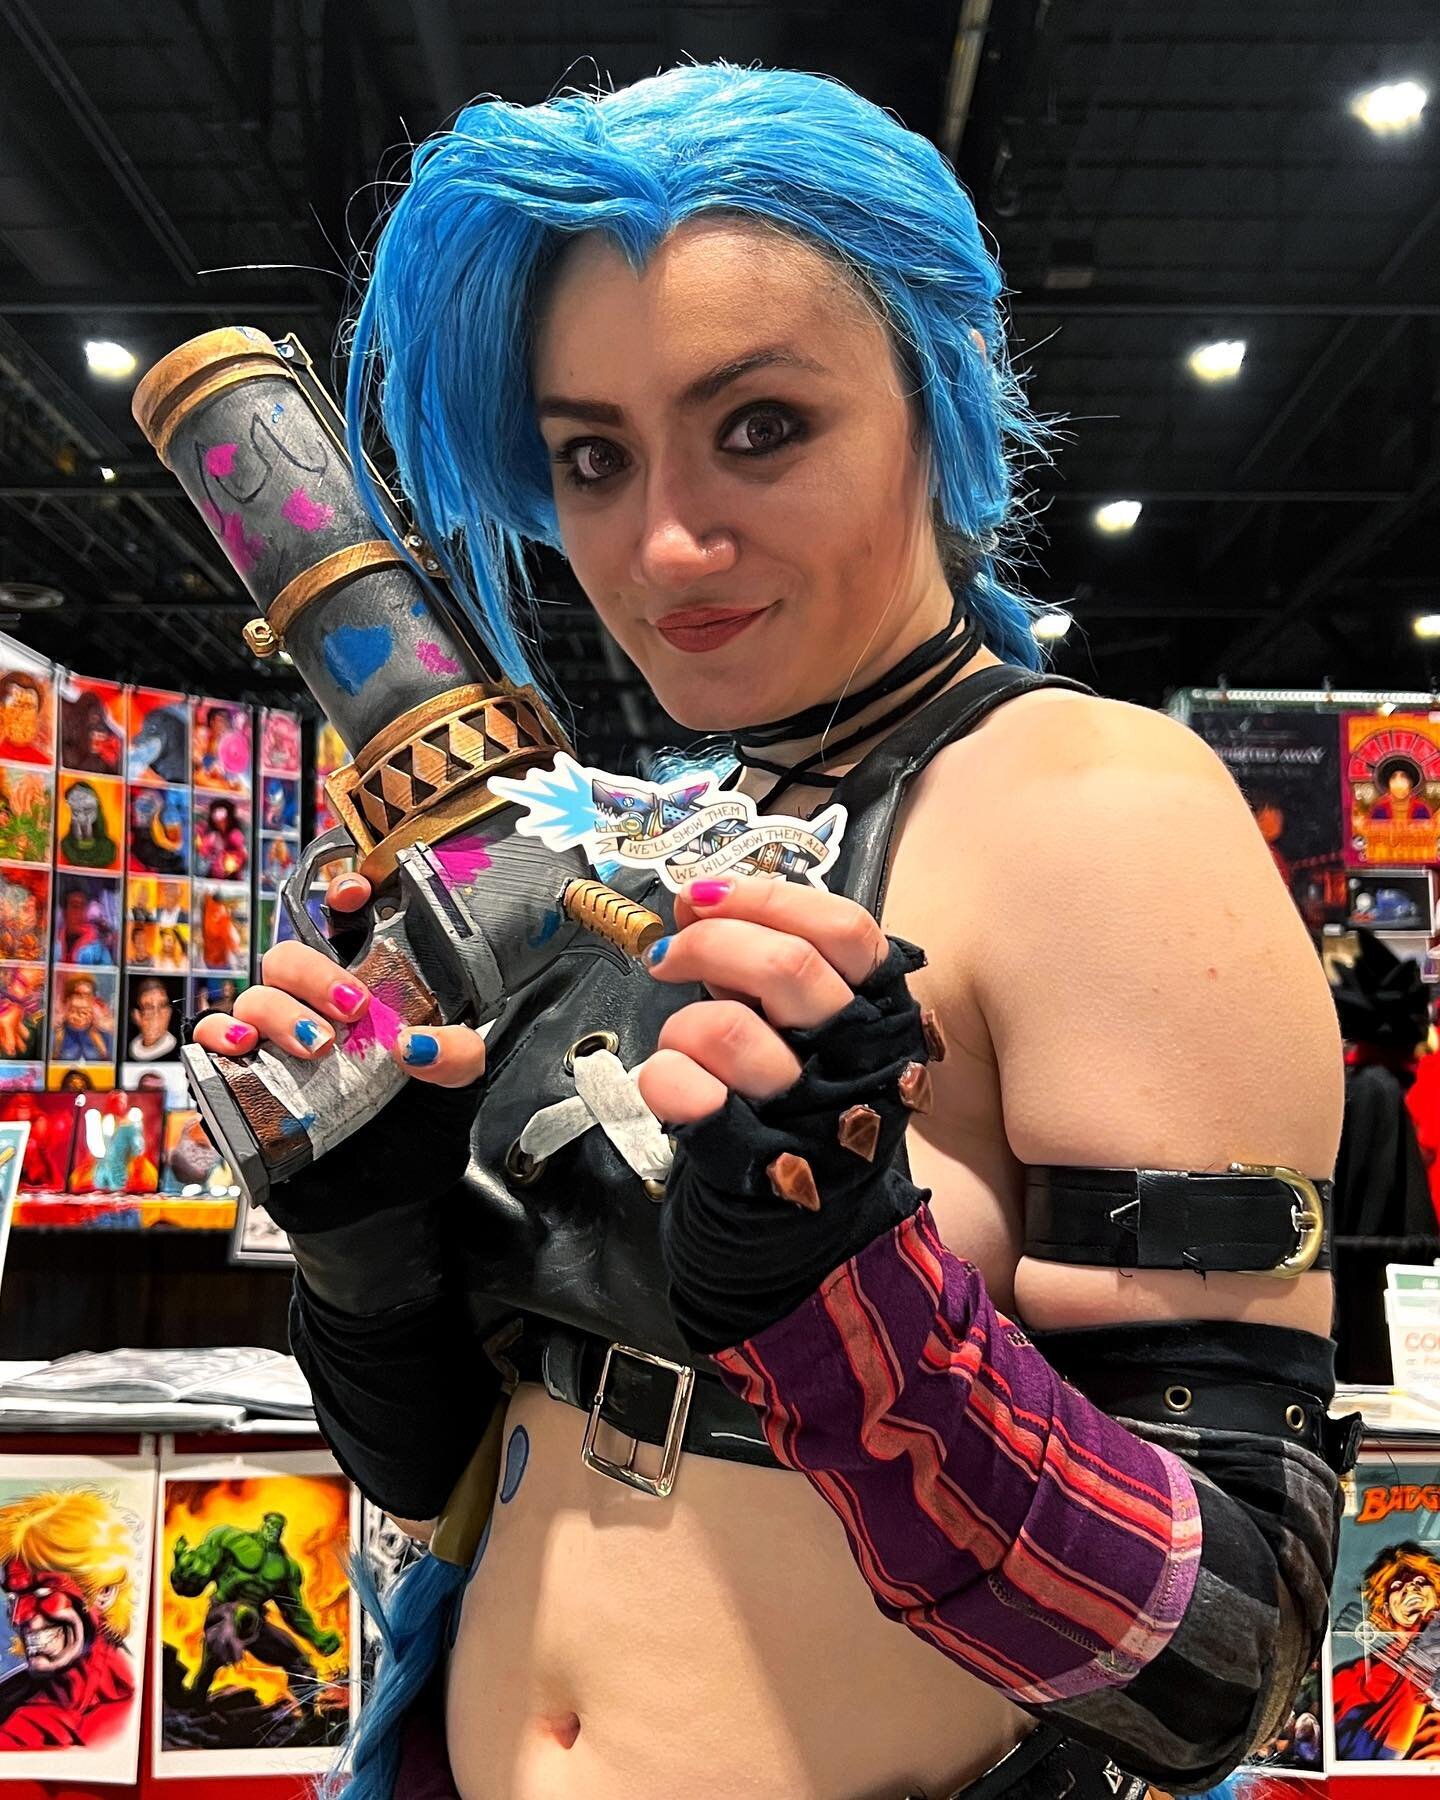 DAY TWO!
.
Saturday has been an absolute BLAST! From the @thesaltybuns takeover to a celeb visit from Jinx! 

I cannot wait to see you all for the FINAL DAY of #C2E2! 
Jinx was portrayed by the perfect @casual_moth_cosplay 
.
#c2e2 #c2e222 #jinx #jin